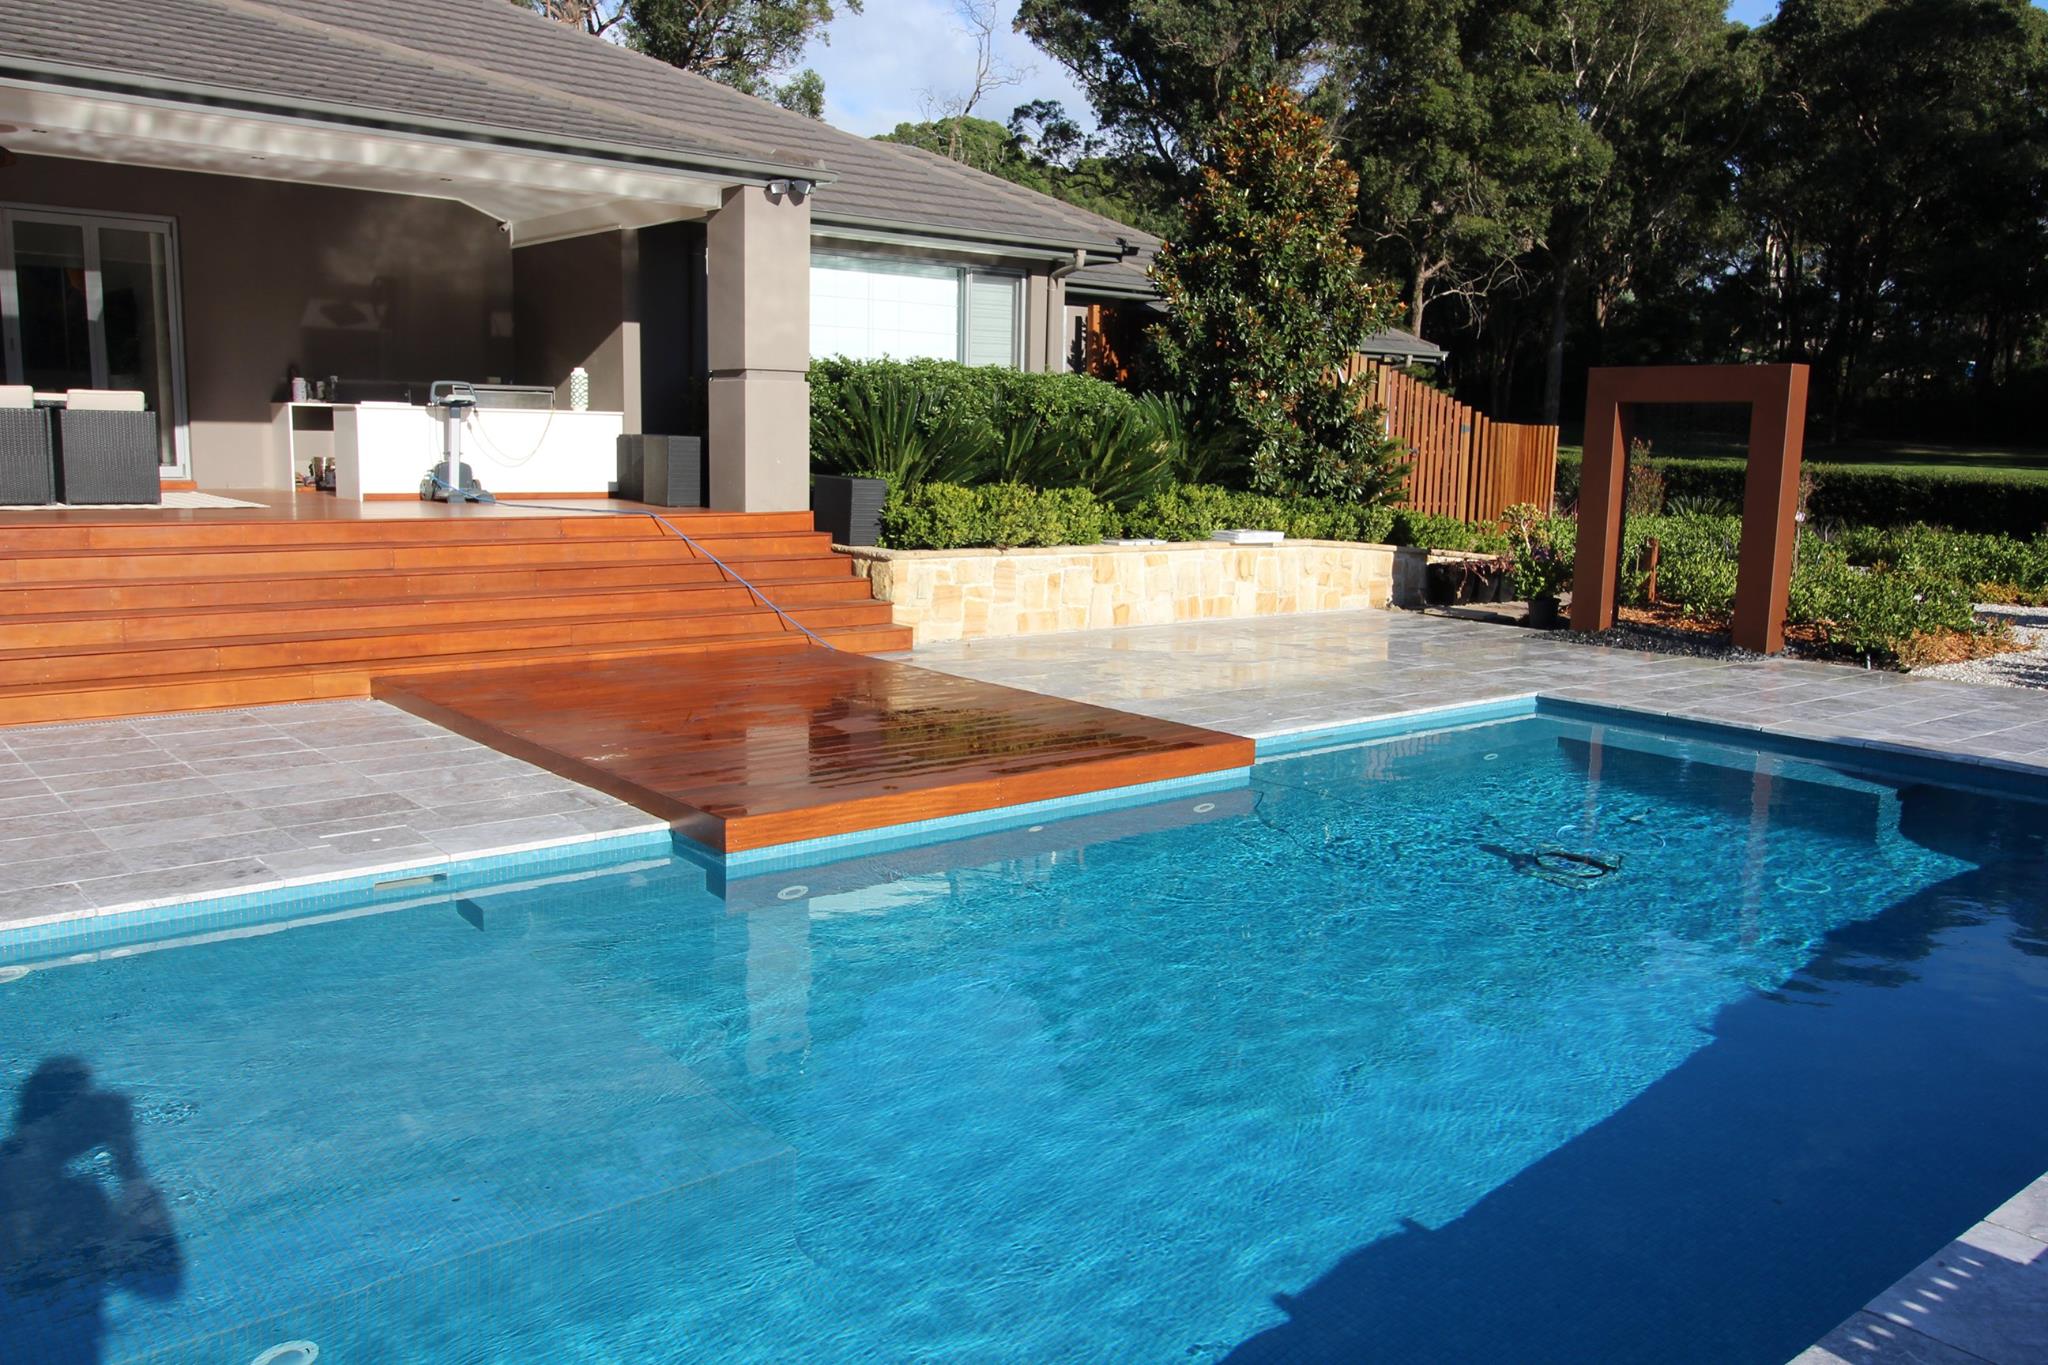 Backyard pool in Sydney home with a new deck